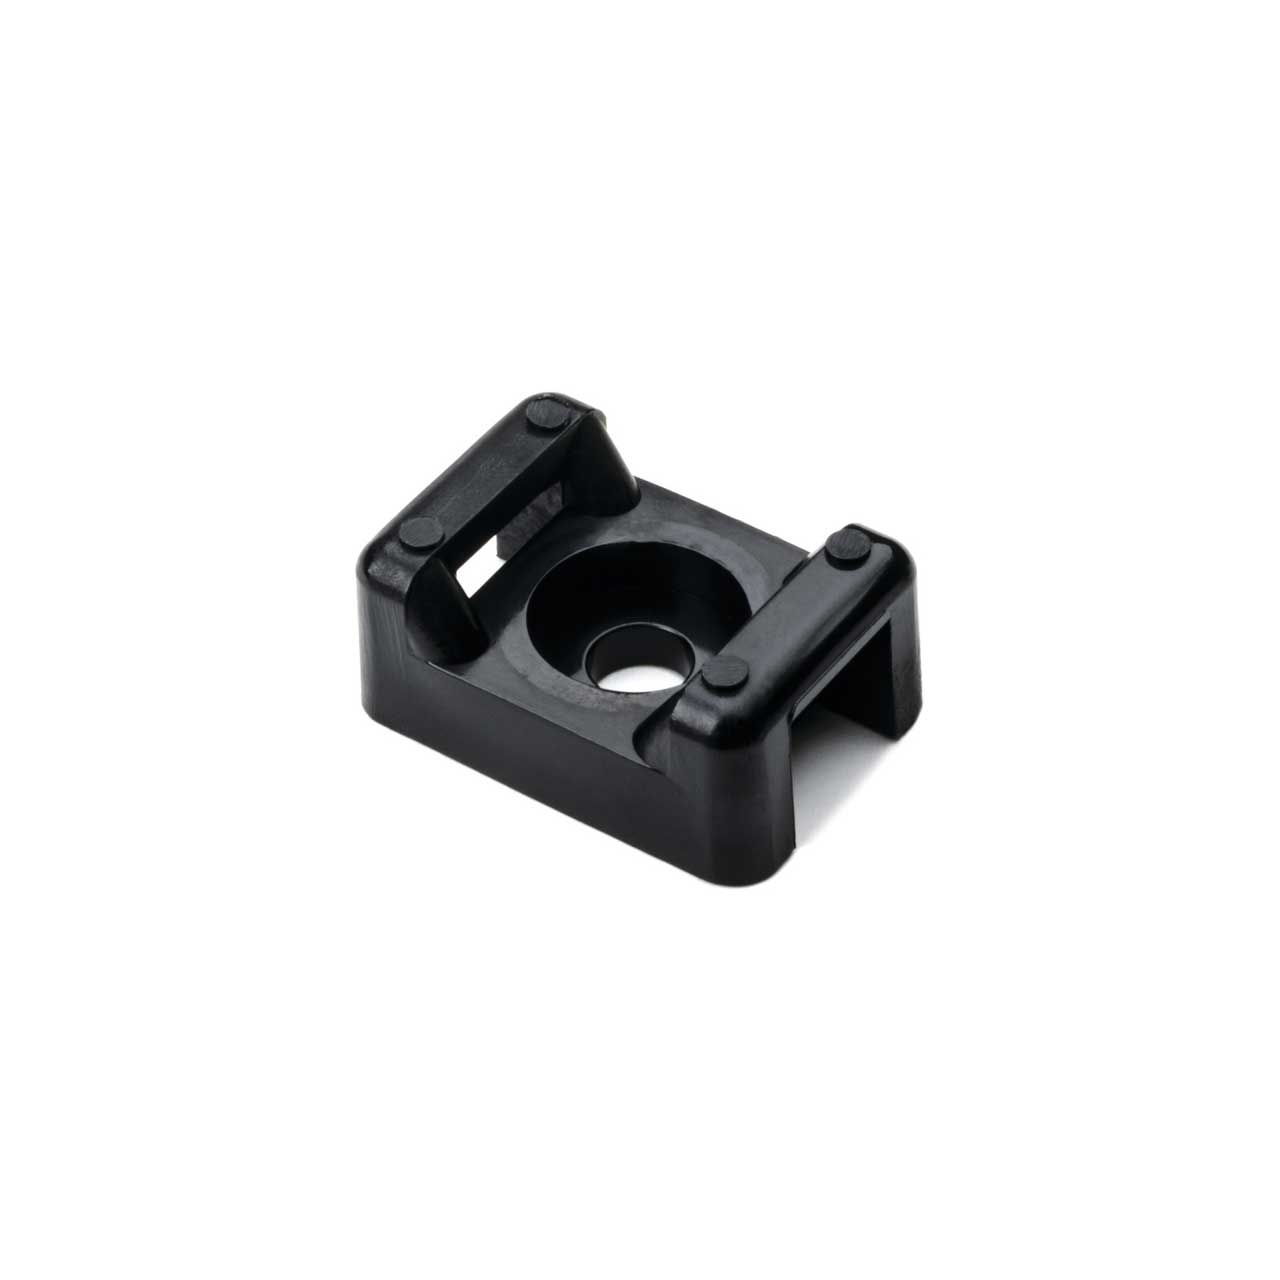 HellermannTyton CTM20C2 Cable Tie Anchor Mount -.86x.61 Inch/.18 Inch Hole Dia/.31 Inch Max Tie - PA66 - Black - 100pk